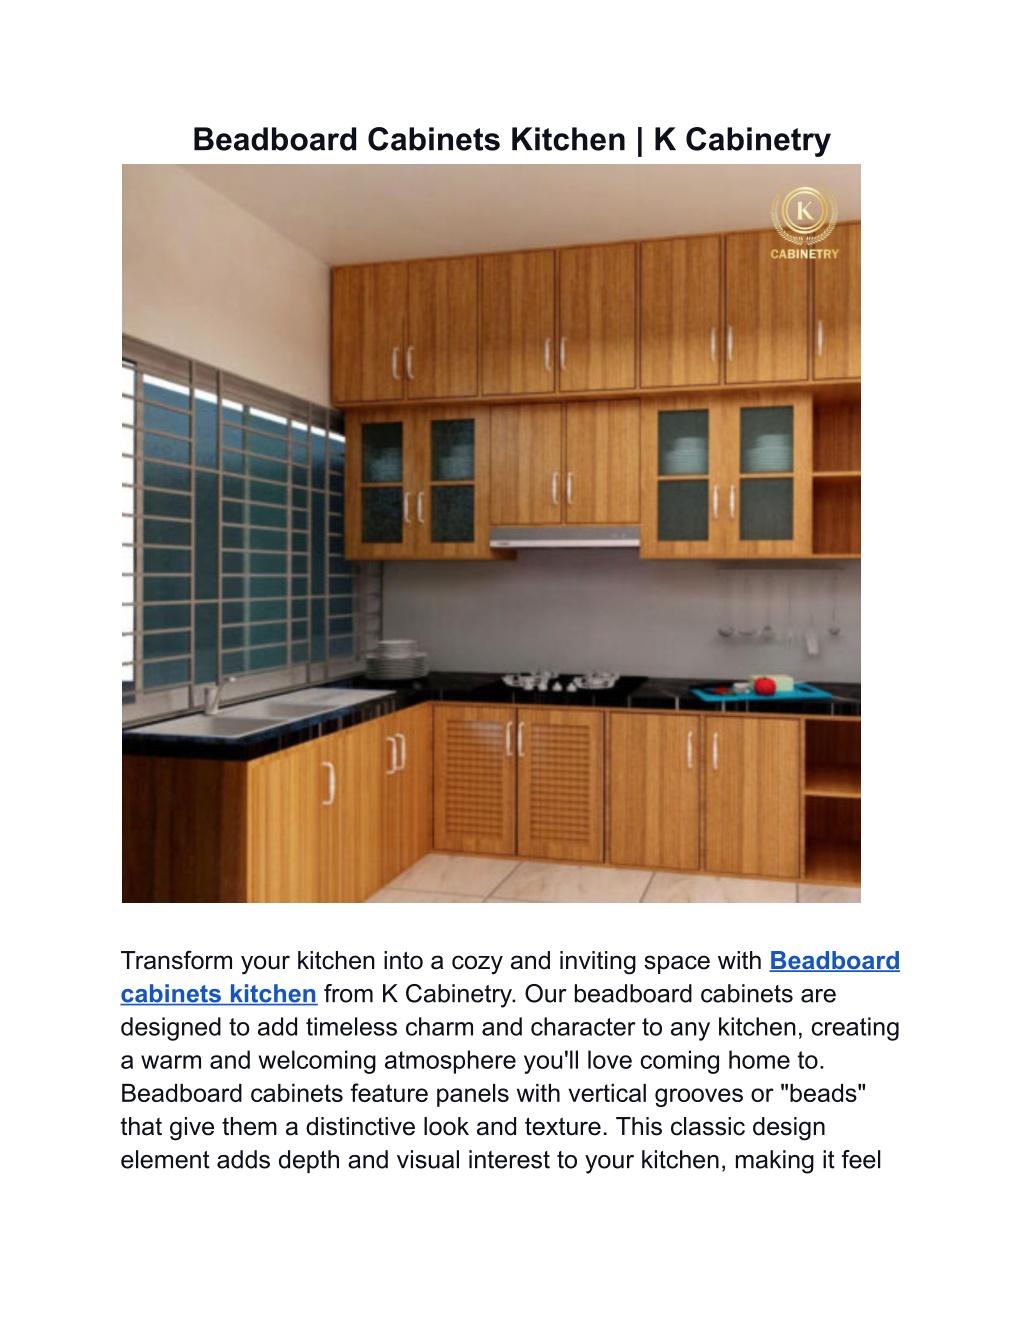 PPT - Beadboard Cabinets Kitchen _ K Cabinetry PowerPoint Presentation ...